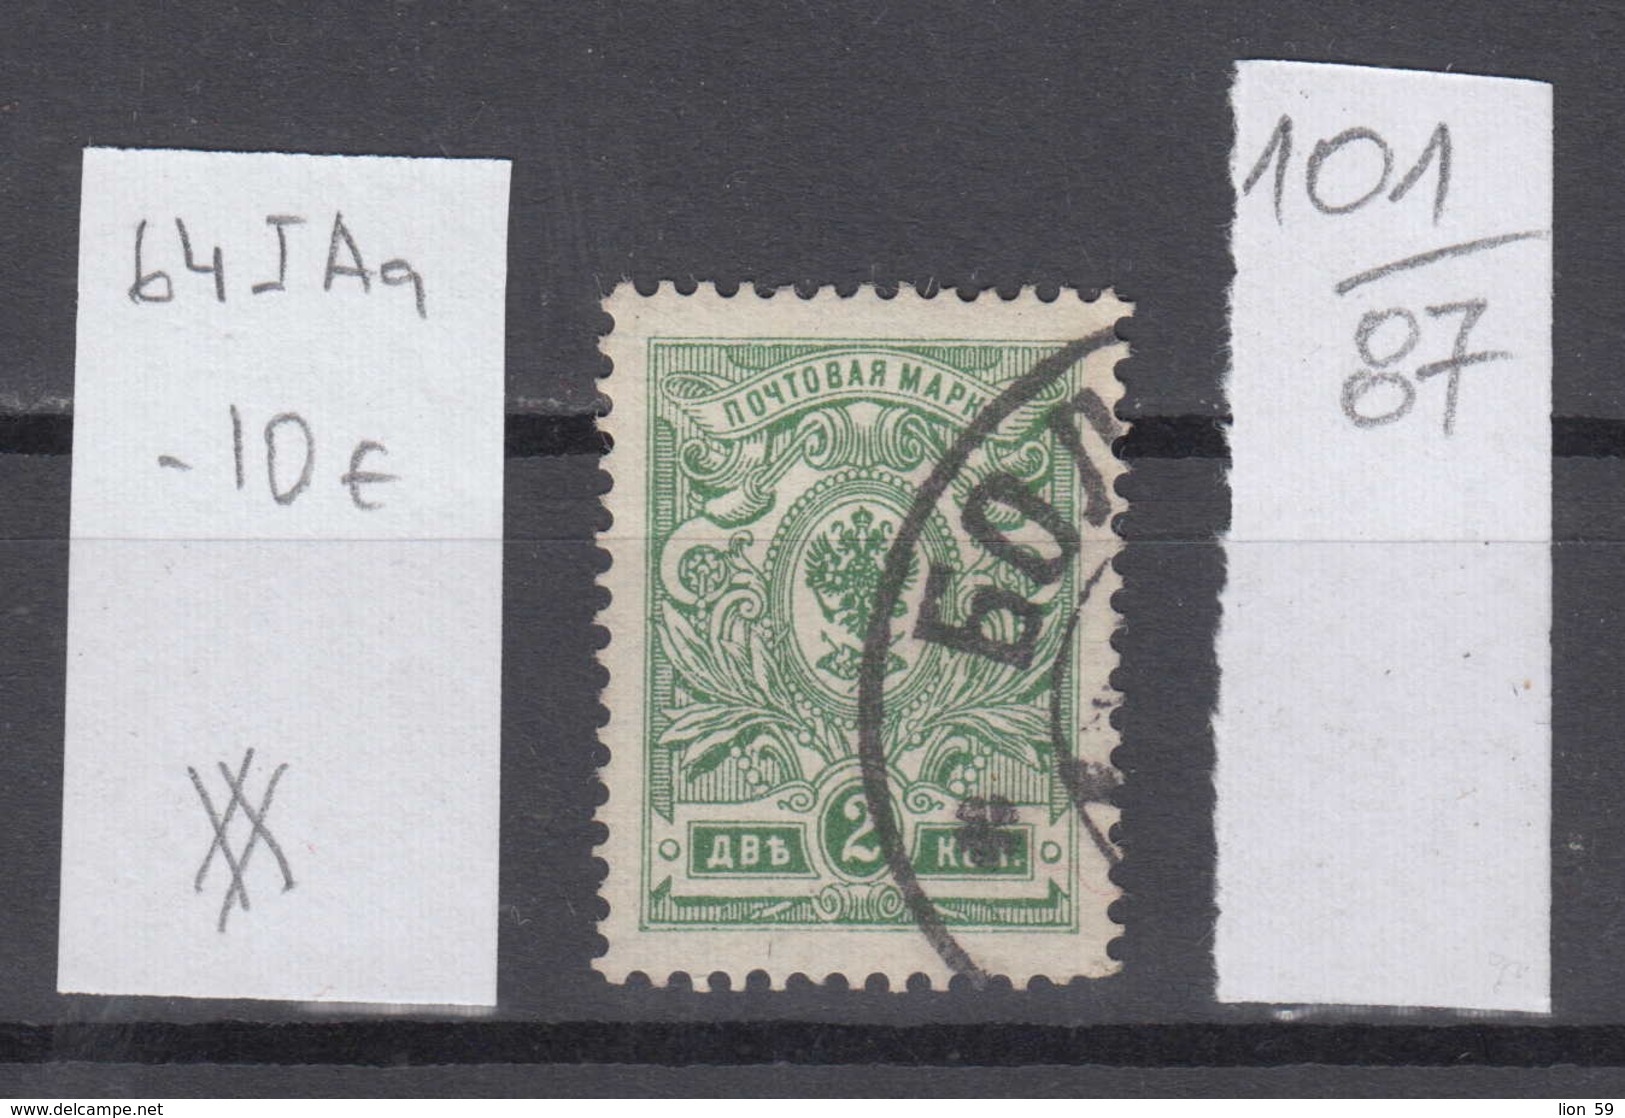 87K101 / 1908 - Michel Nr. 64 I A A - 2 K. , OWz , 14 1/4 : 14 3/4  Freimarken , Staatswappen ,used ( O ) Russia Russie - Used Stamps